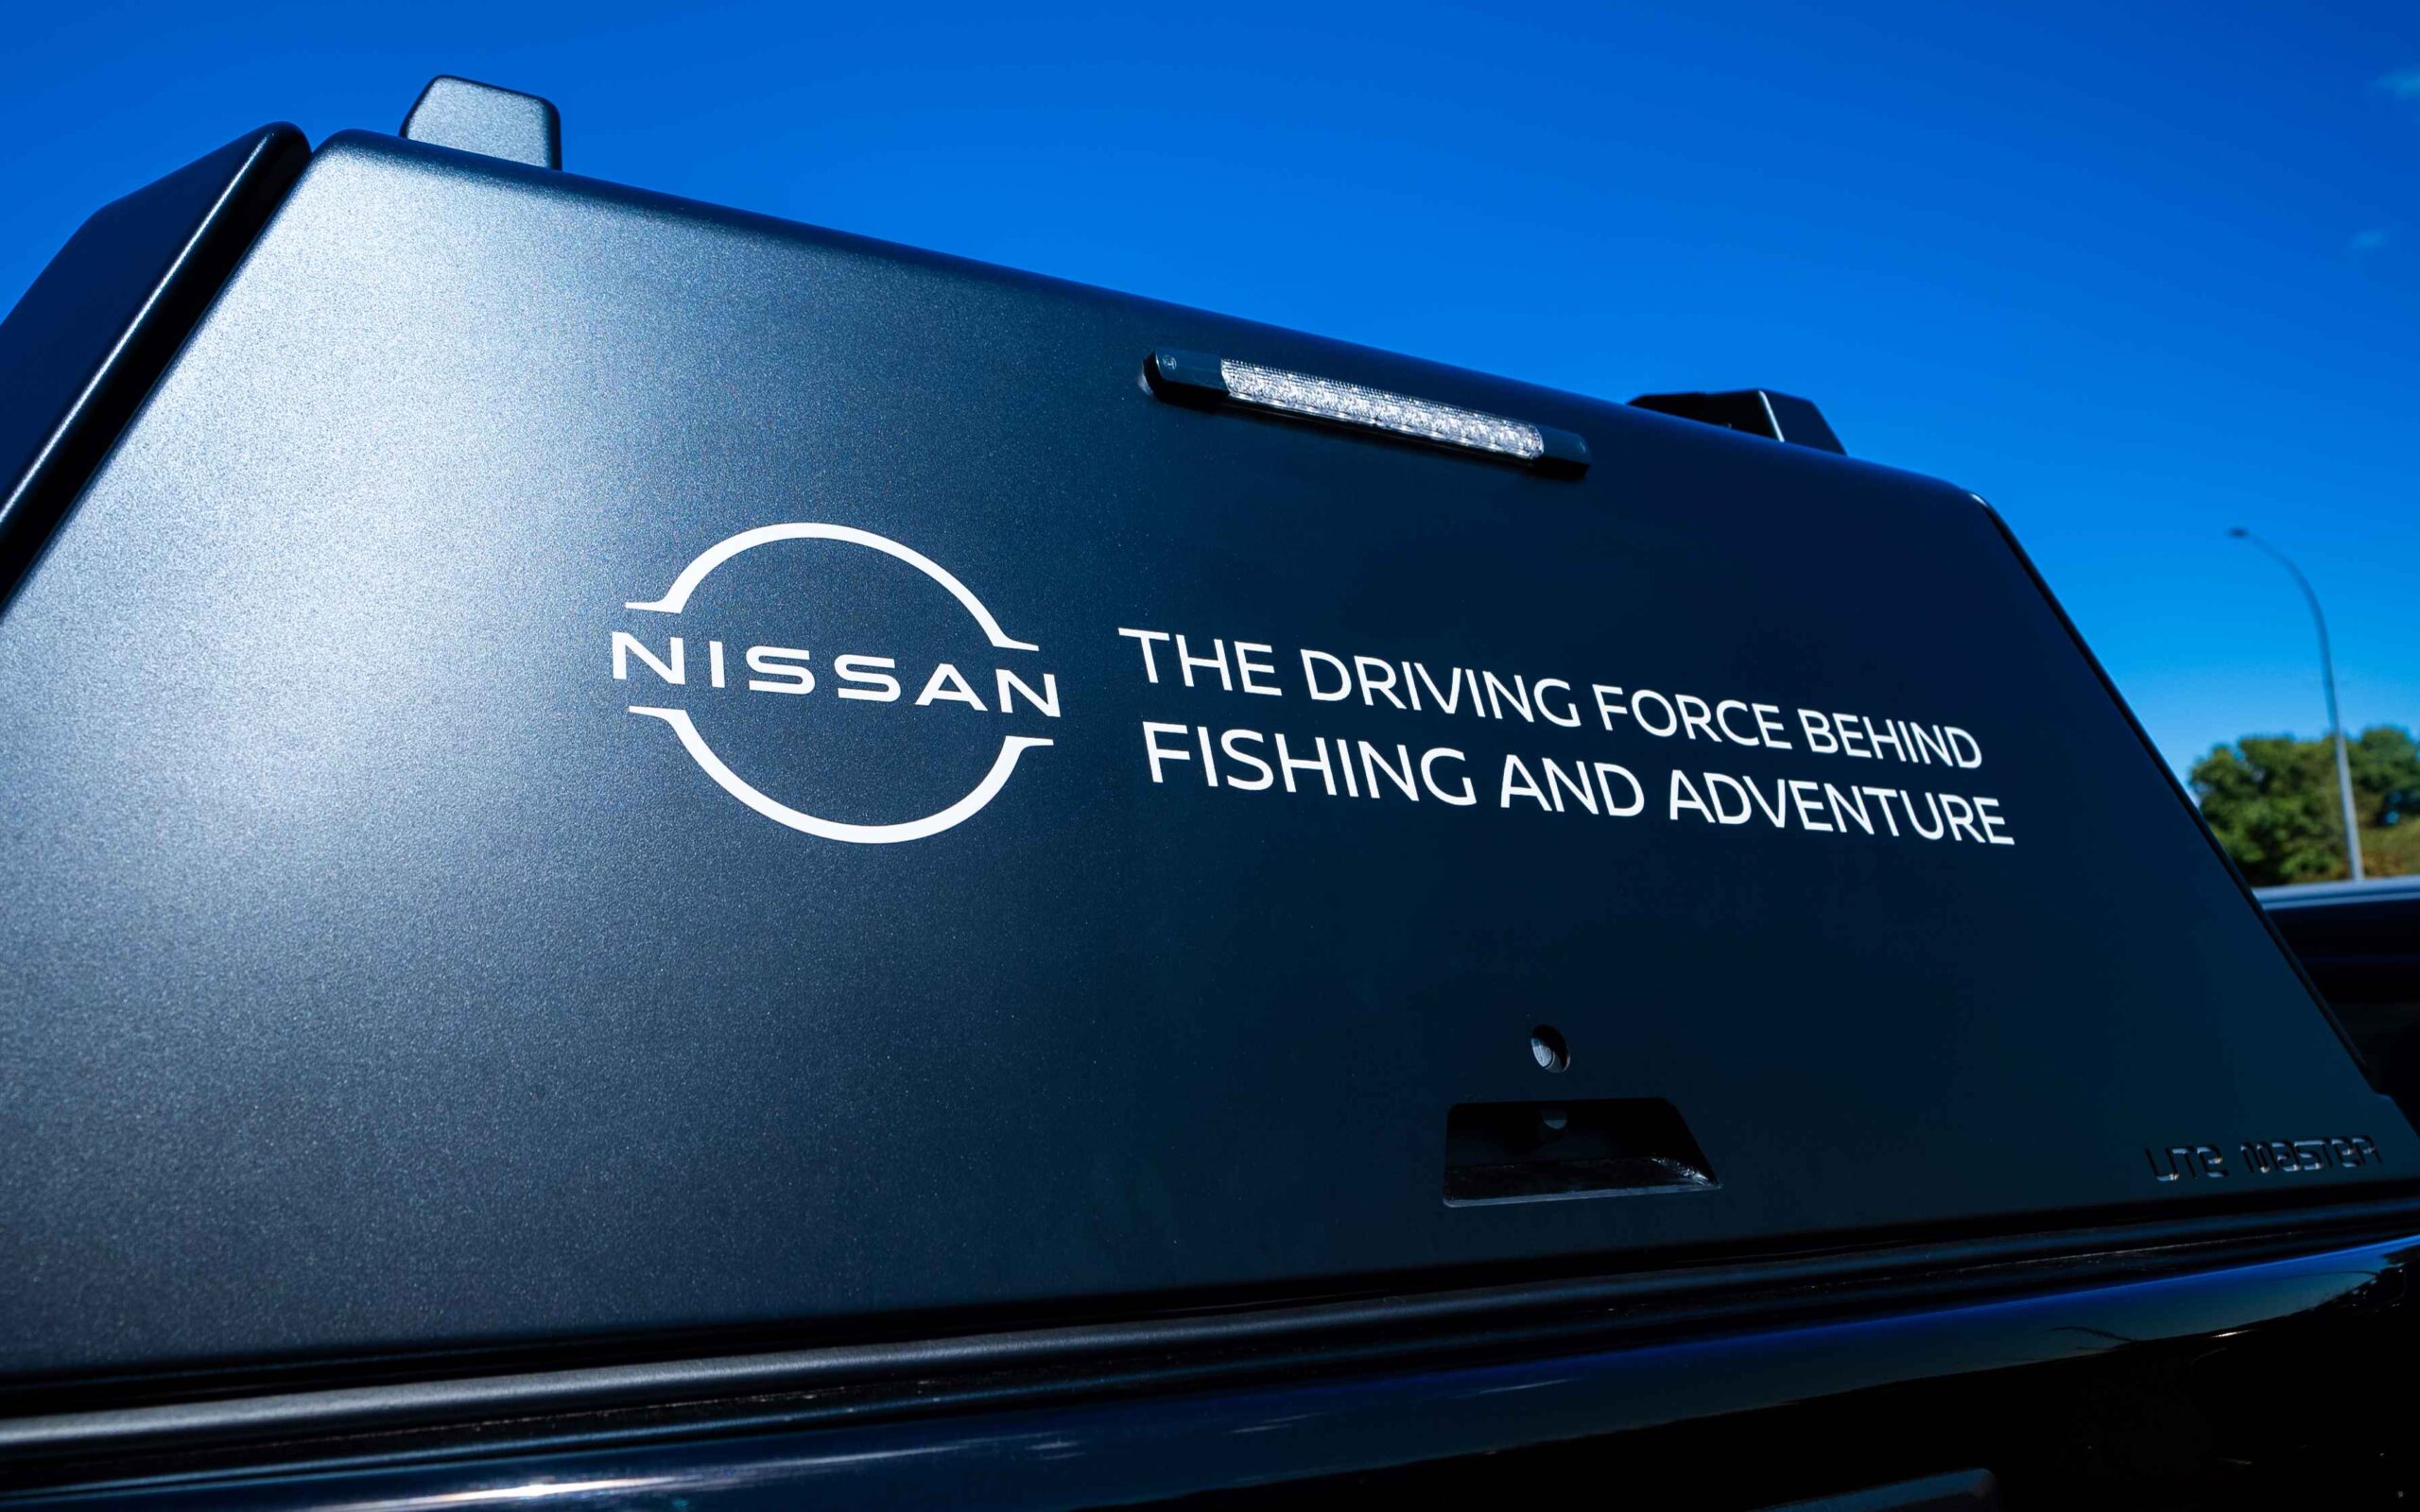 Fishing & Adventure show hooked on Nissan